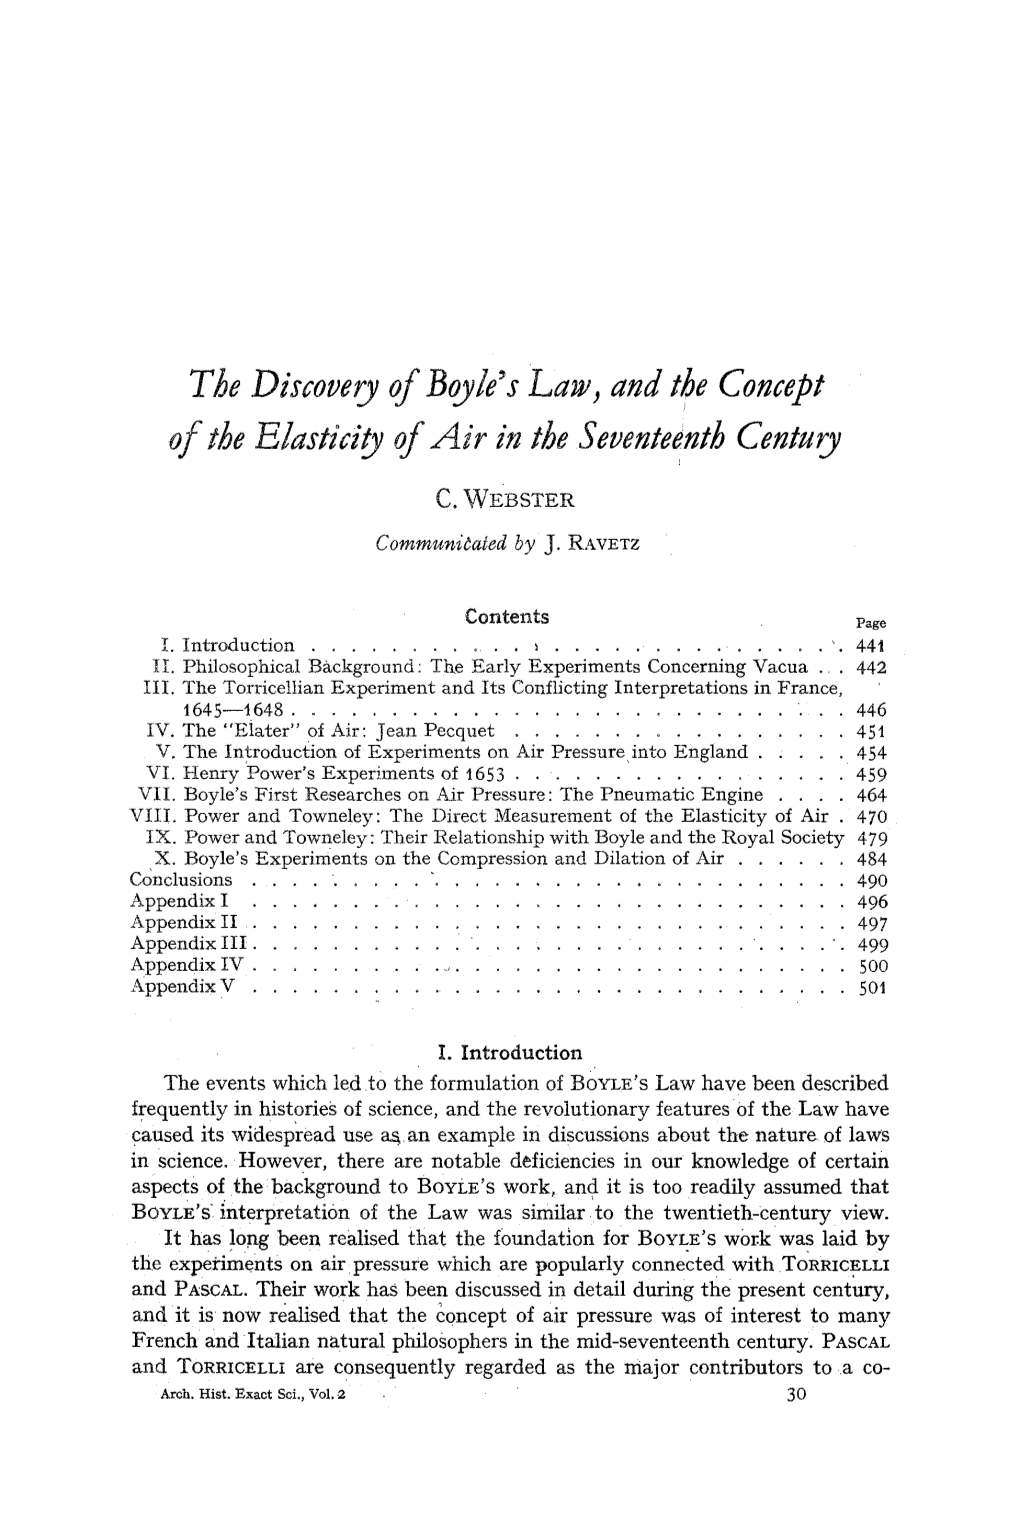 The Discovery of Boyle's Law, and the Concept of the Elasticity of Air in The